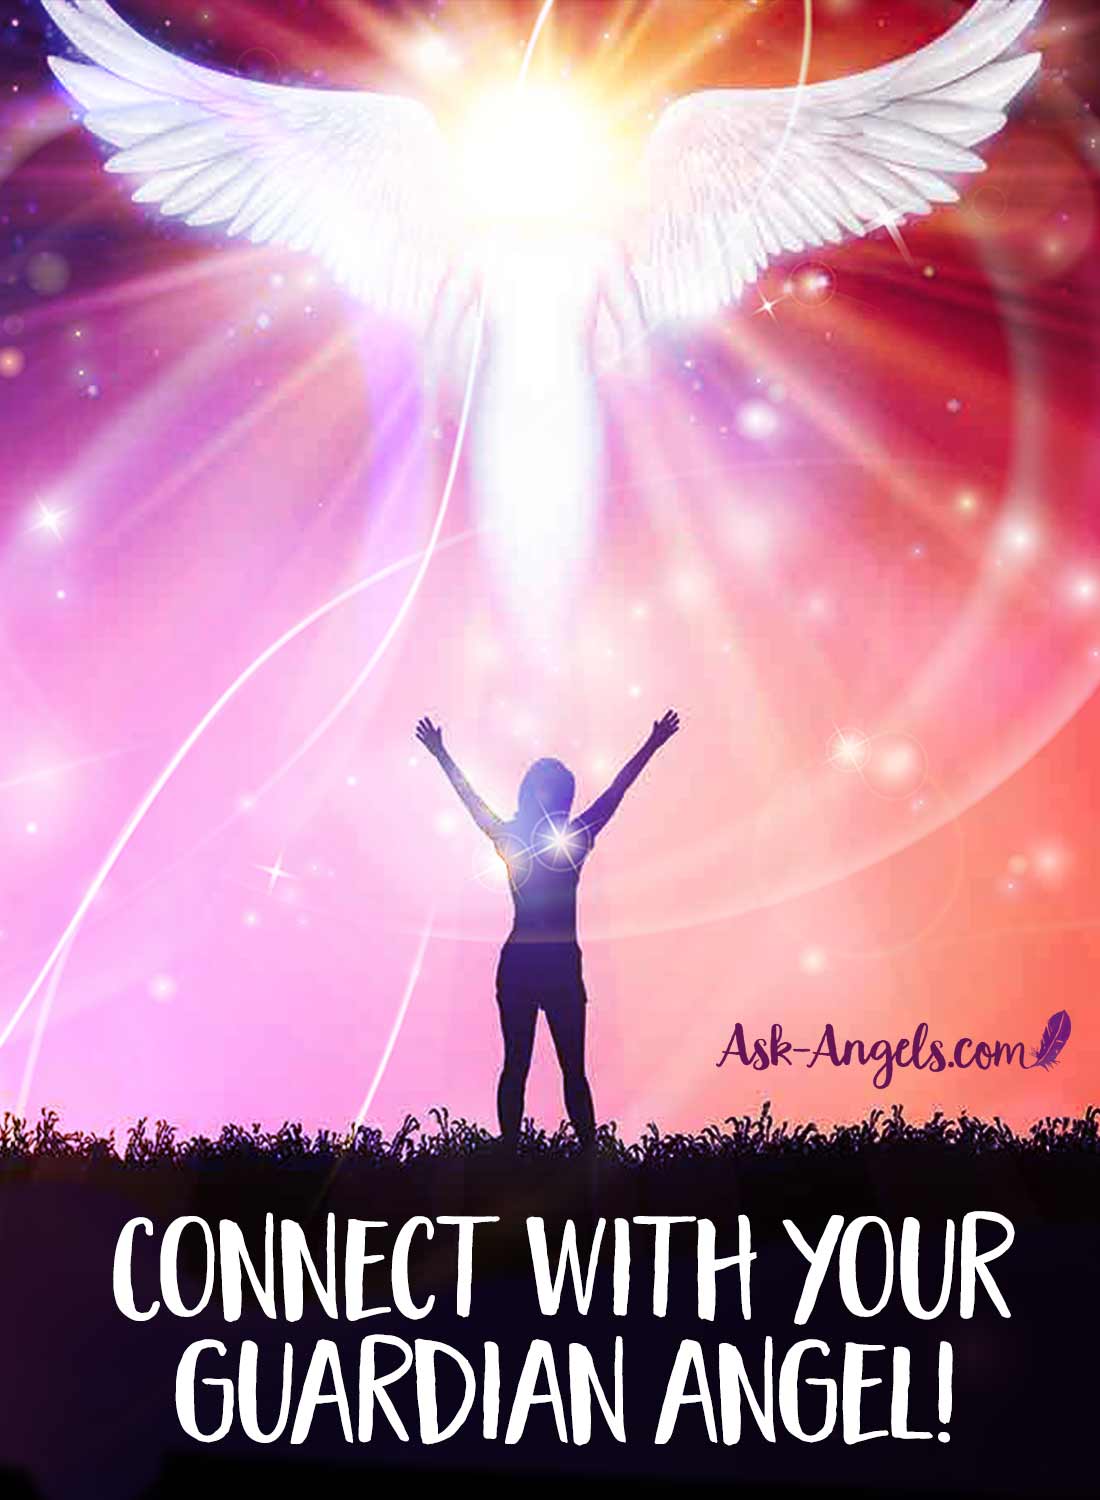 You can connect with your guardian angel! Learn how here!